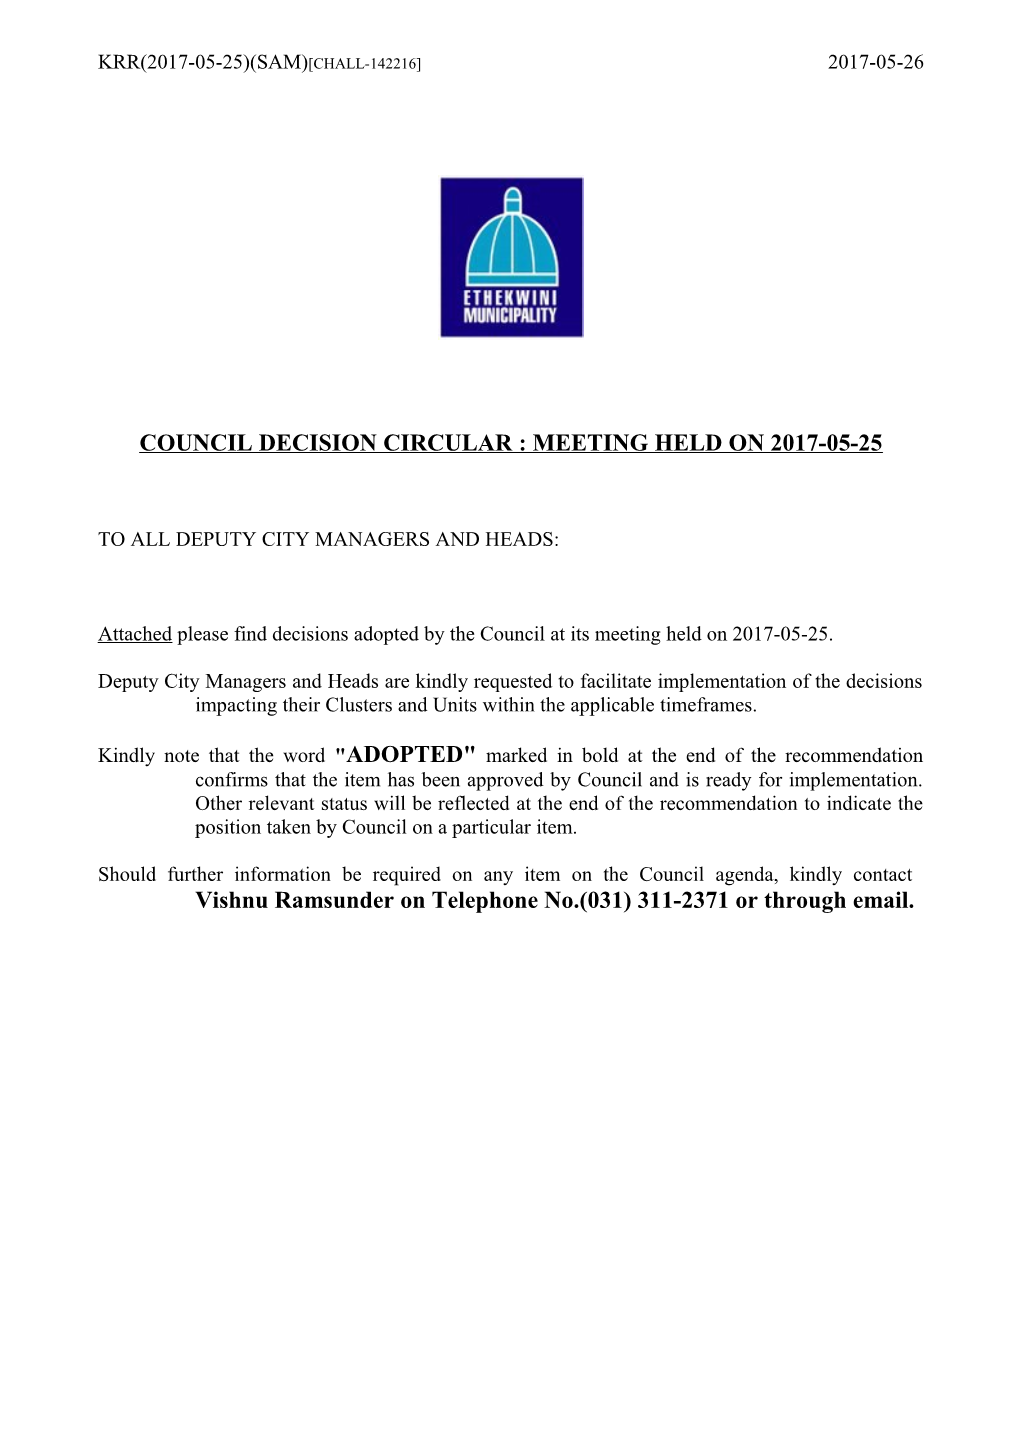 Council Decision Circular : Meeting Held on 2017-05-25